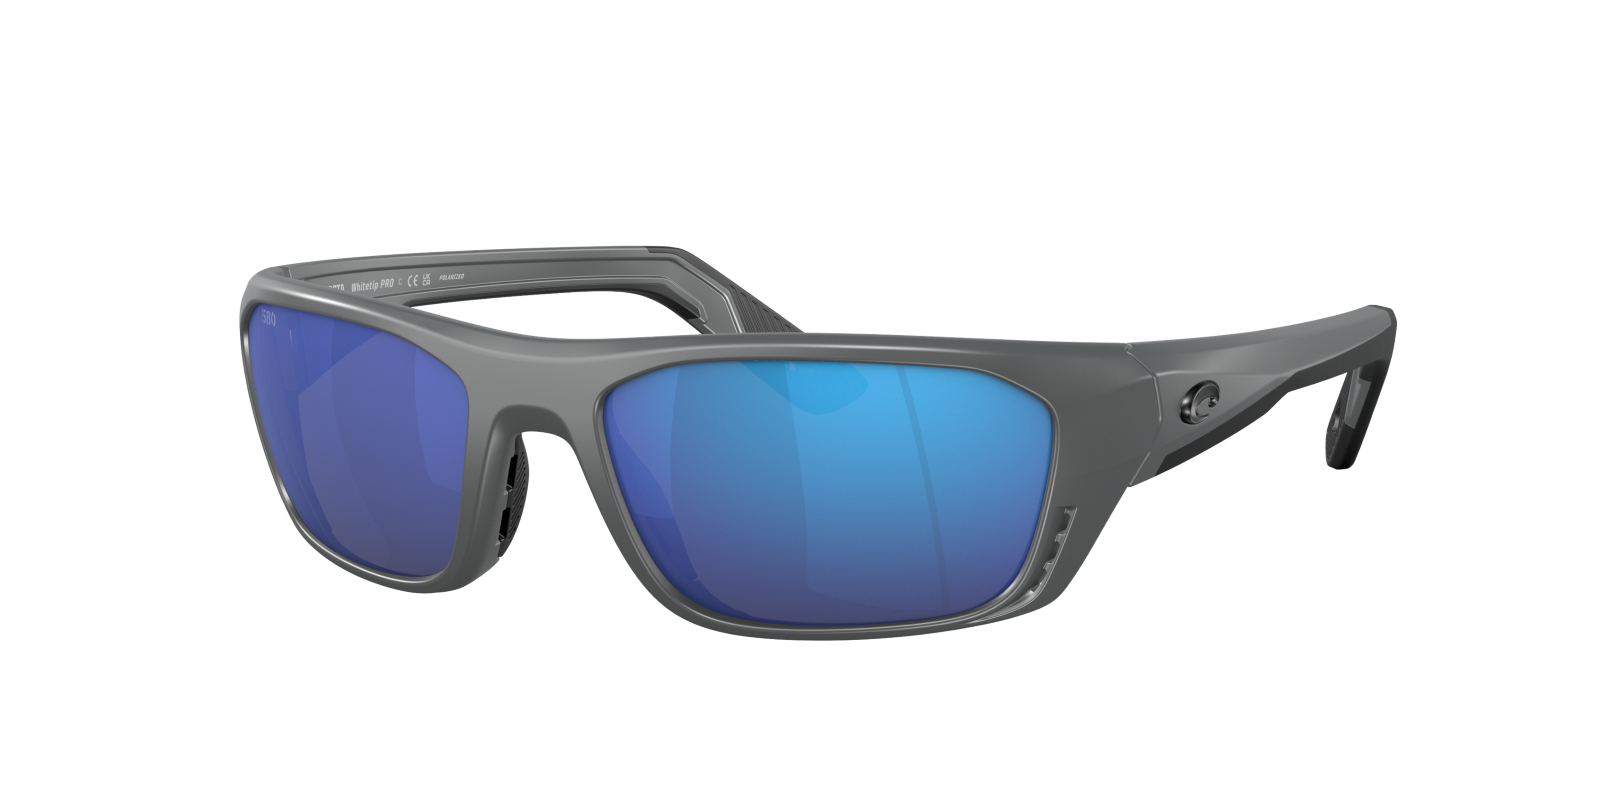 Costa Completes PRO Series with NEW Whitetip PRO Sunglasses